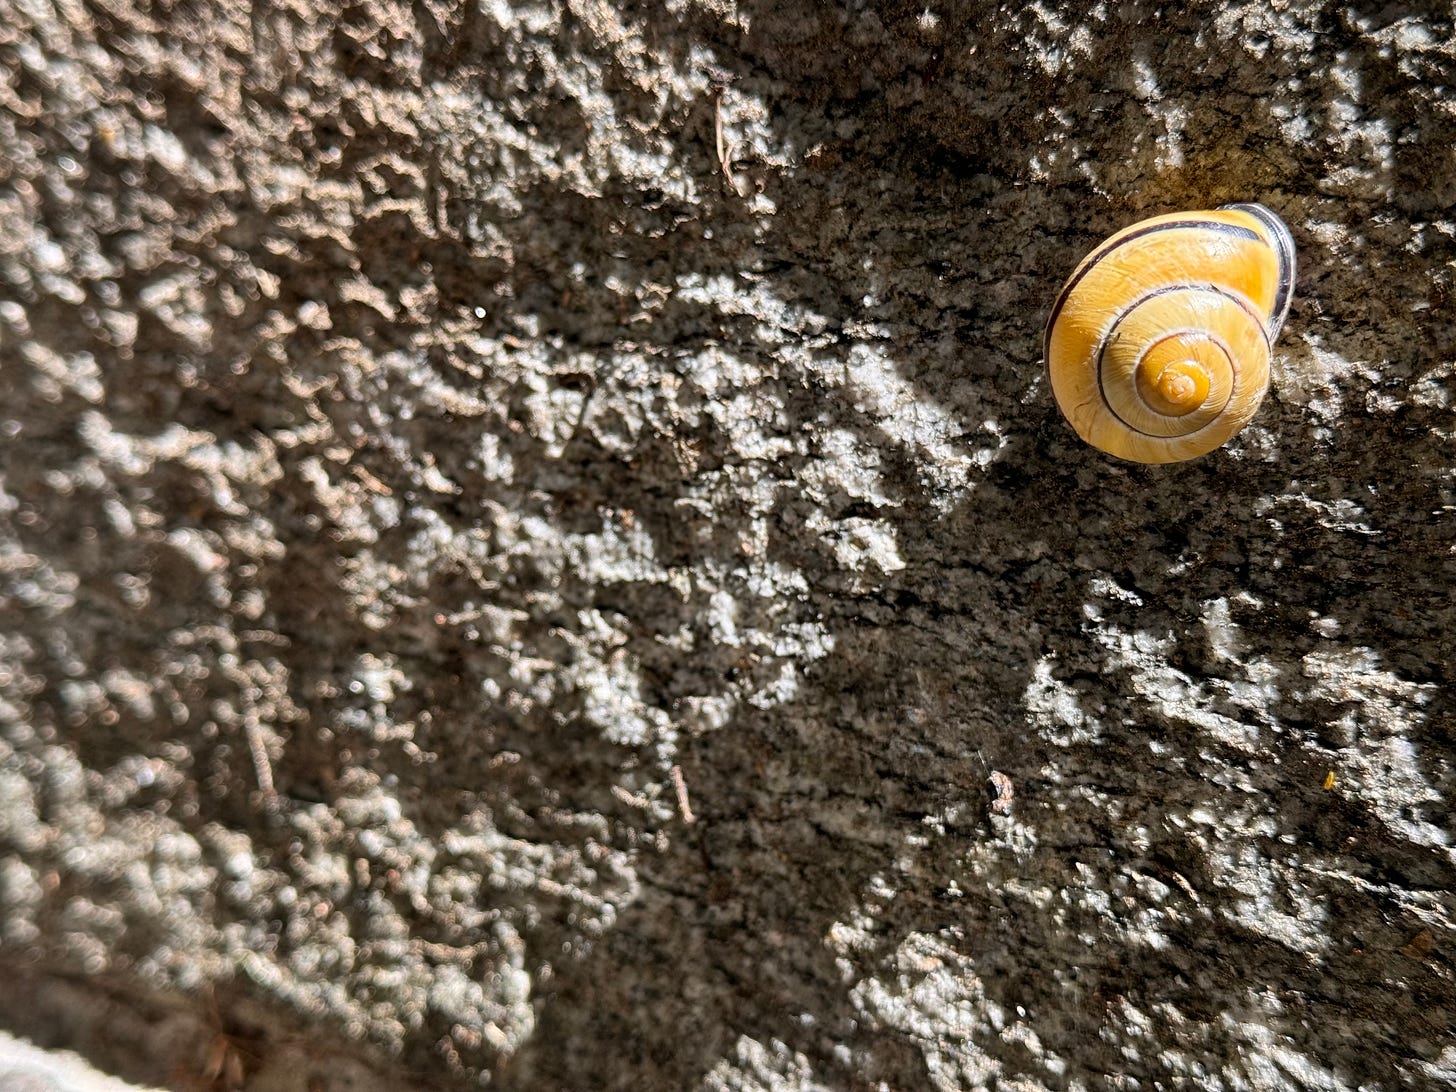 A yellow-ish snail shell as seen from above in sunlight on rocky ground